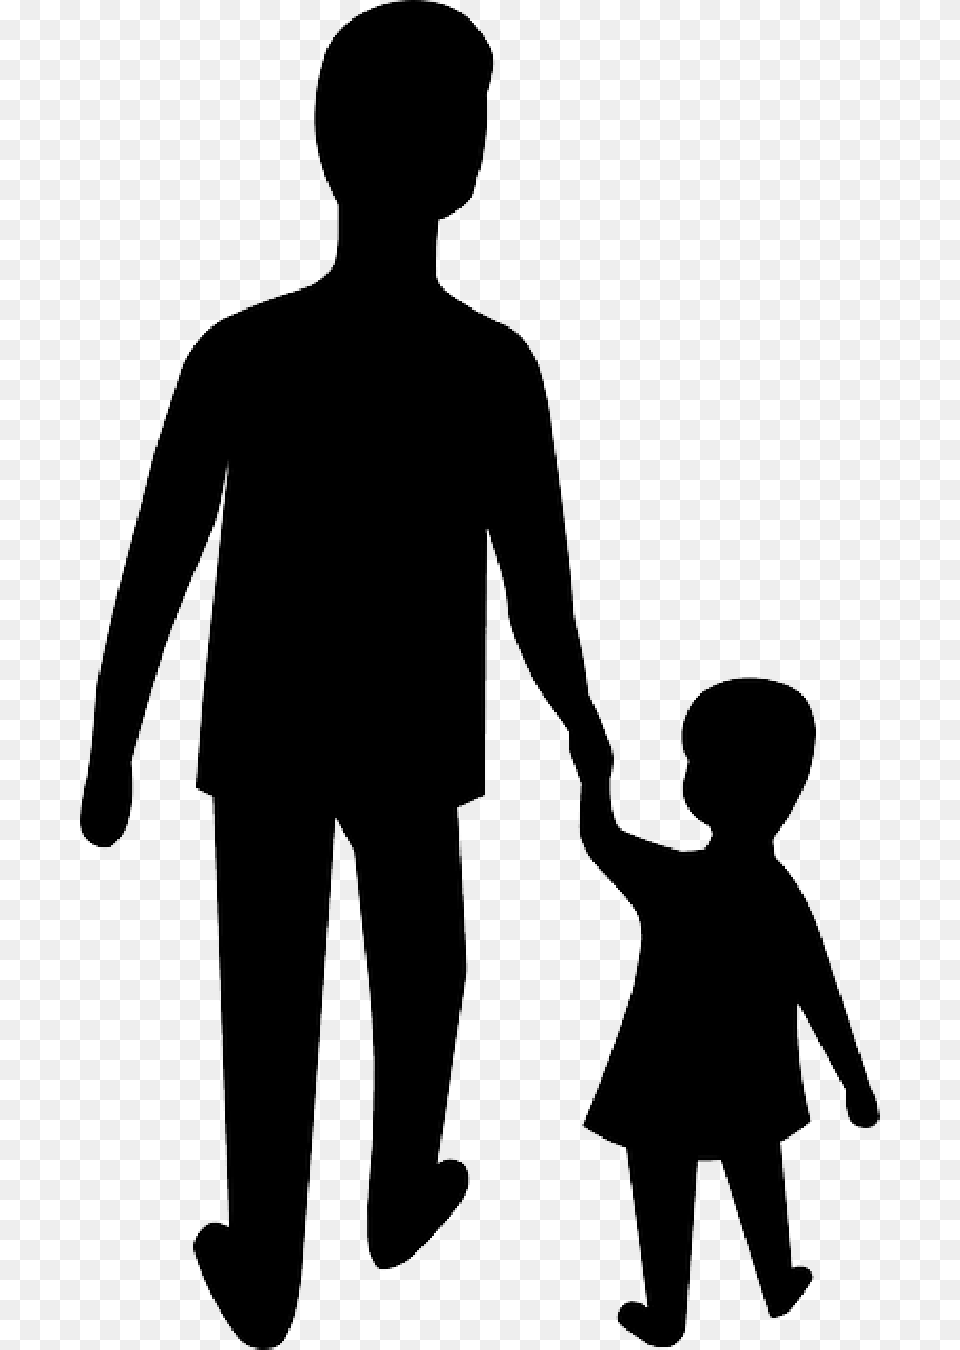 Outline Symbol Hand People Kid Silhouette Adult Adult And Child Holding Hands Cartoon, Person, Walking, Male, Man Free Transparent Png